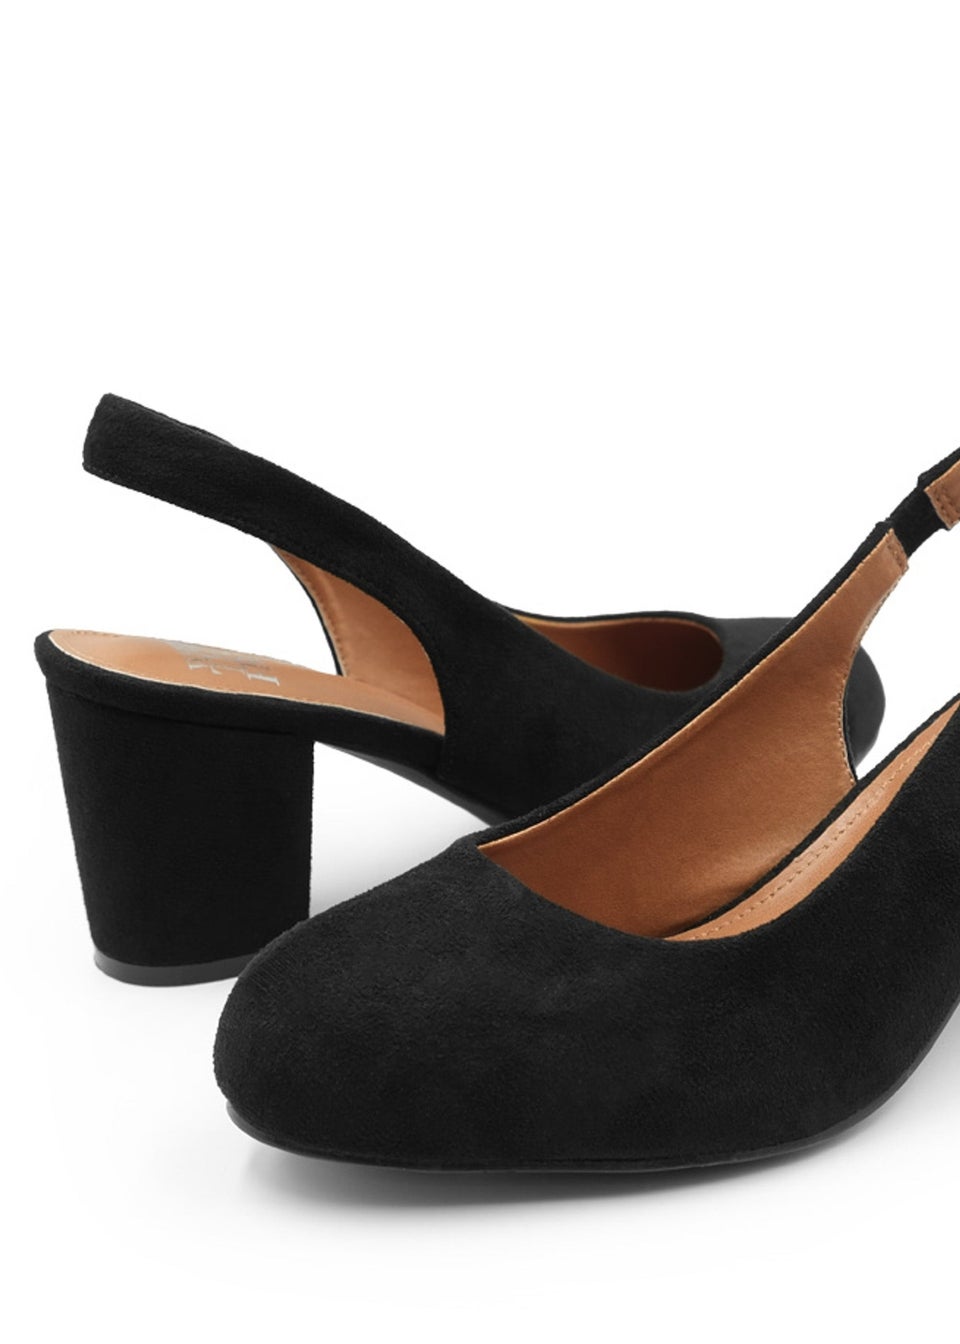 Where's That From Black Edith Wide Fit Suede Block Heels